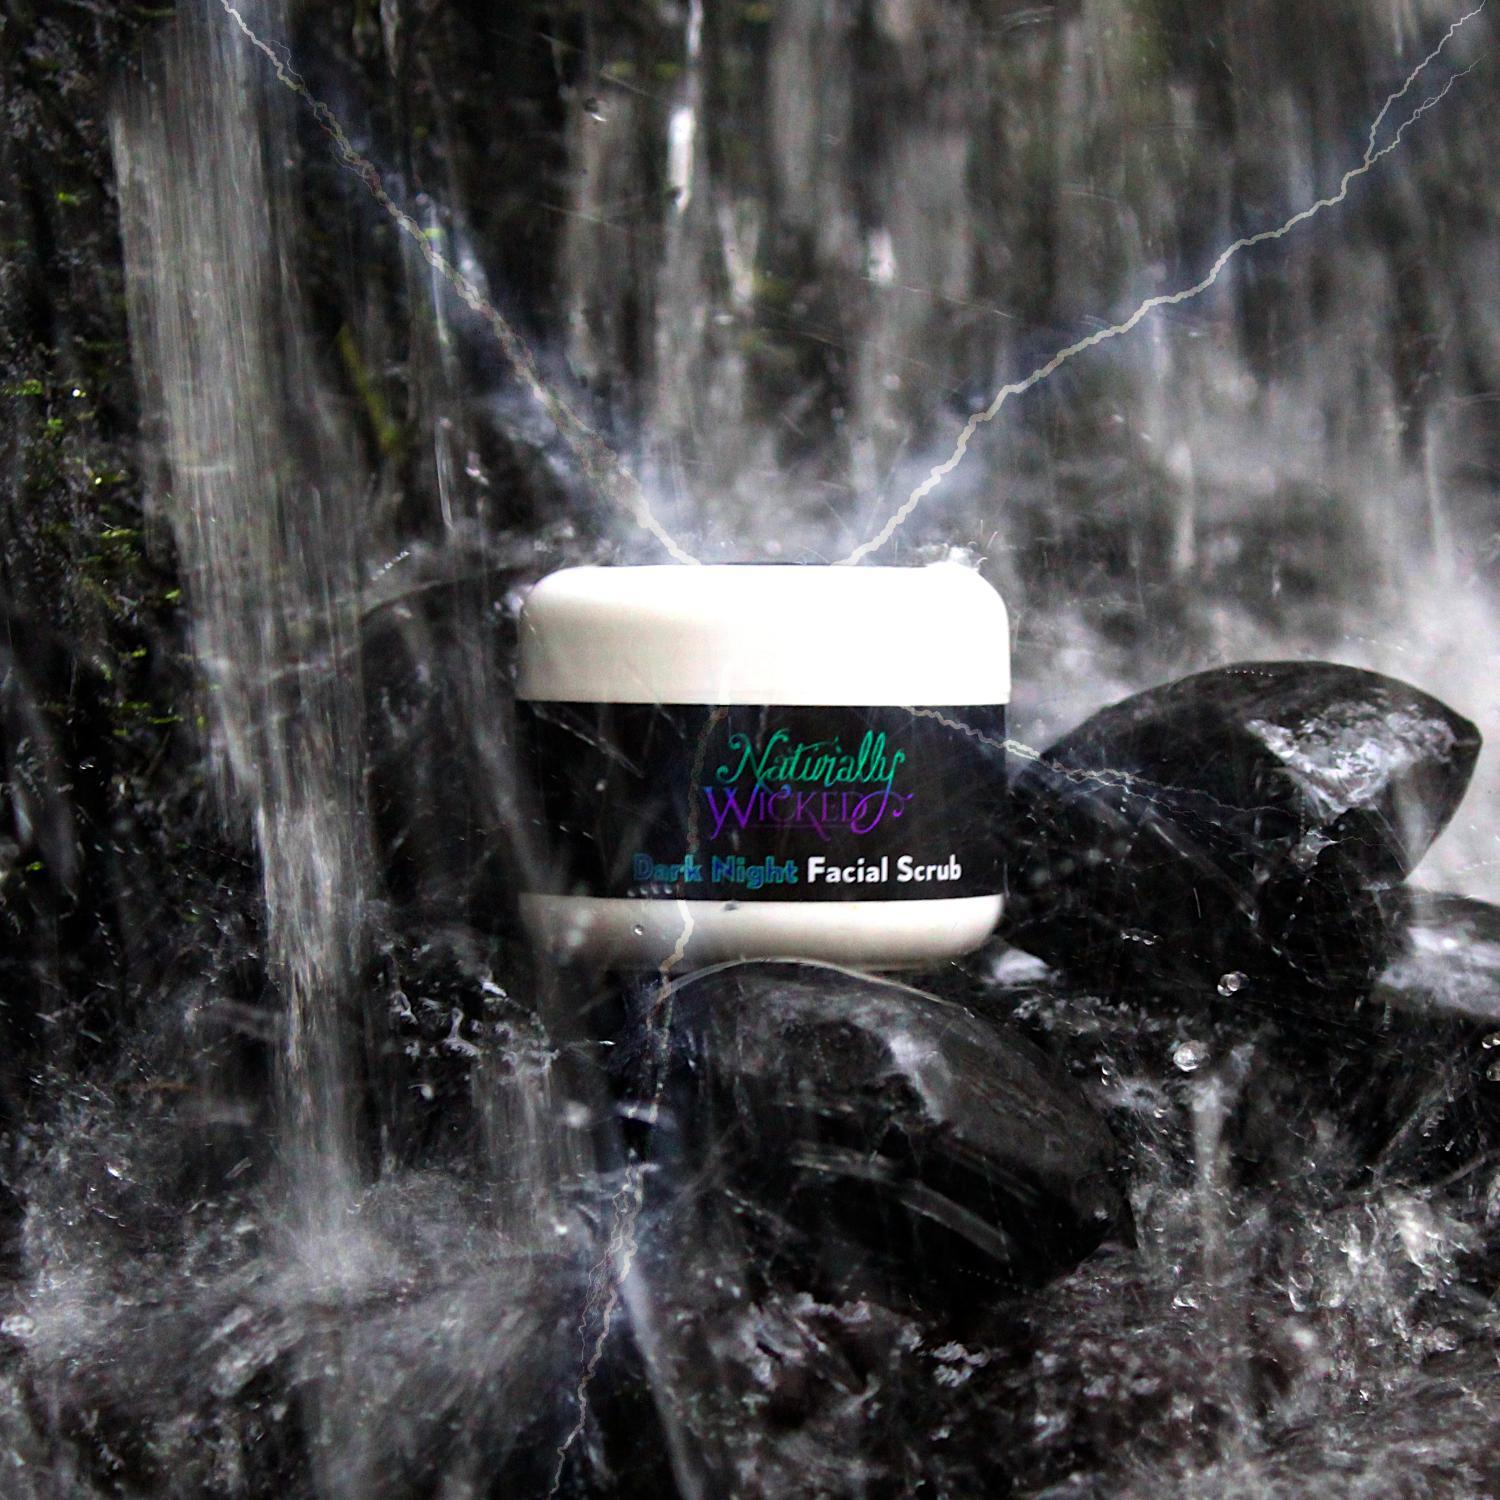 Naturally Wicked Dark Night Facial Scrub Surrounded By Charcoal In Waterfall With Electrical Charge